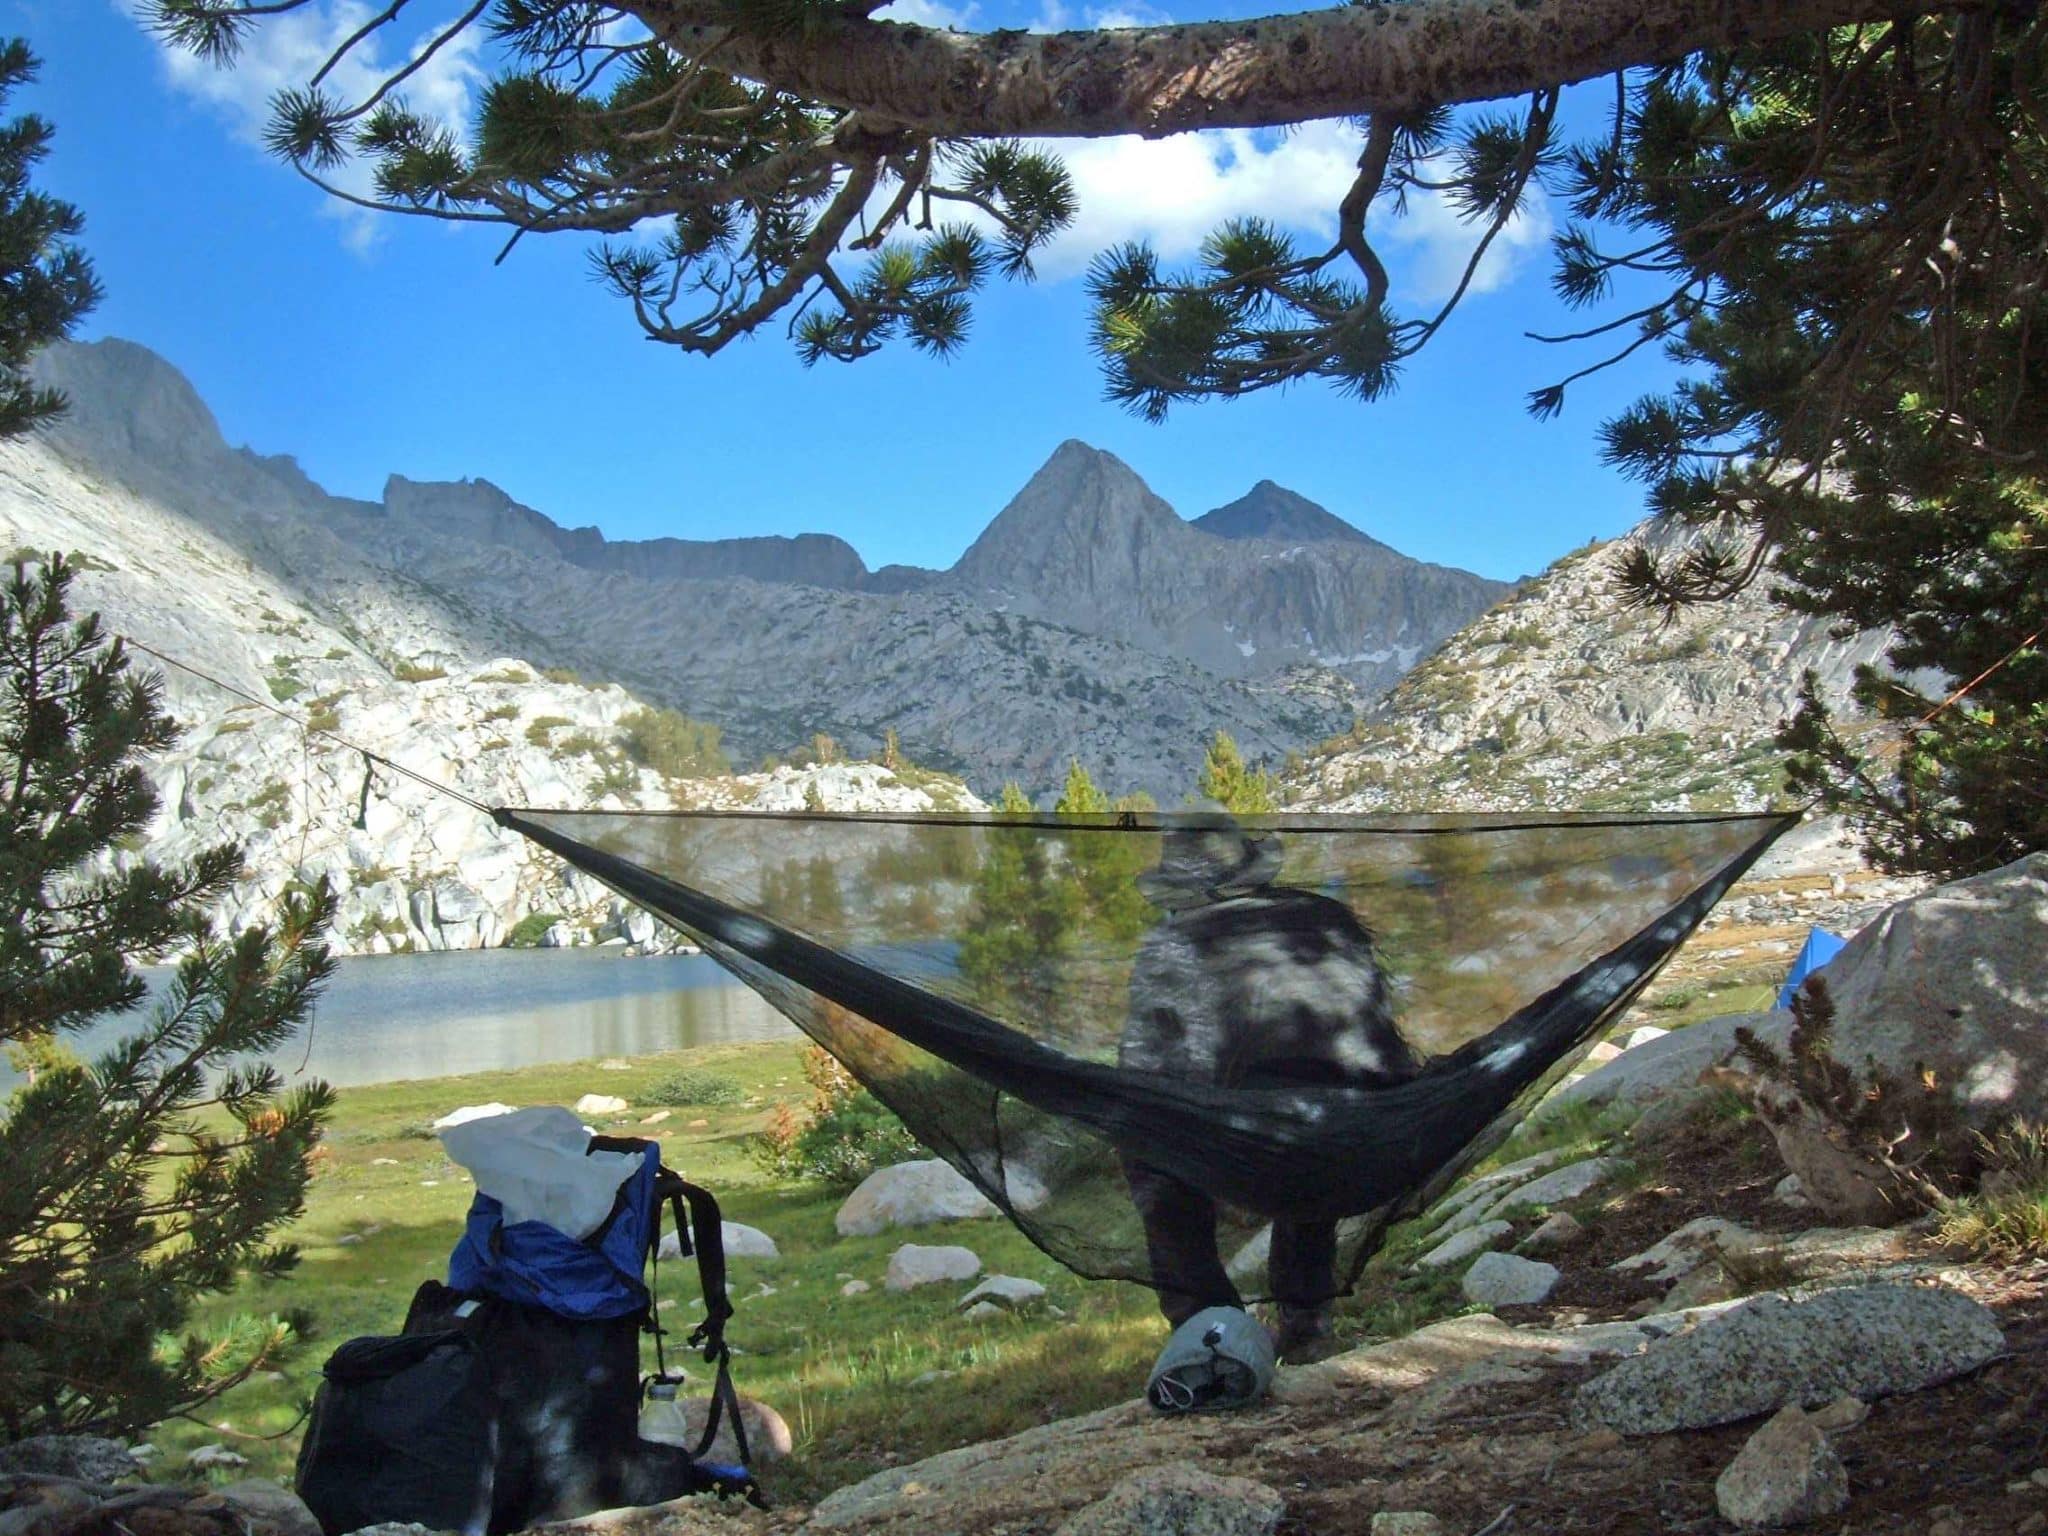 Hammock Camping Part Ii Types Of Backpacking Hammocks And Spec